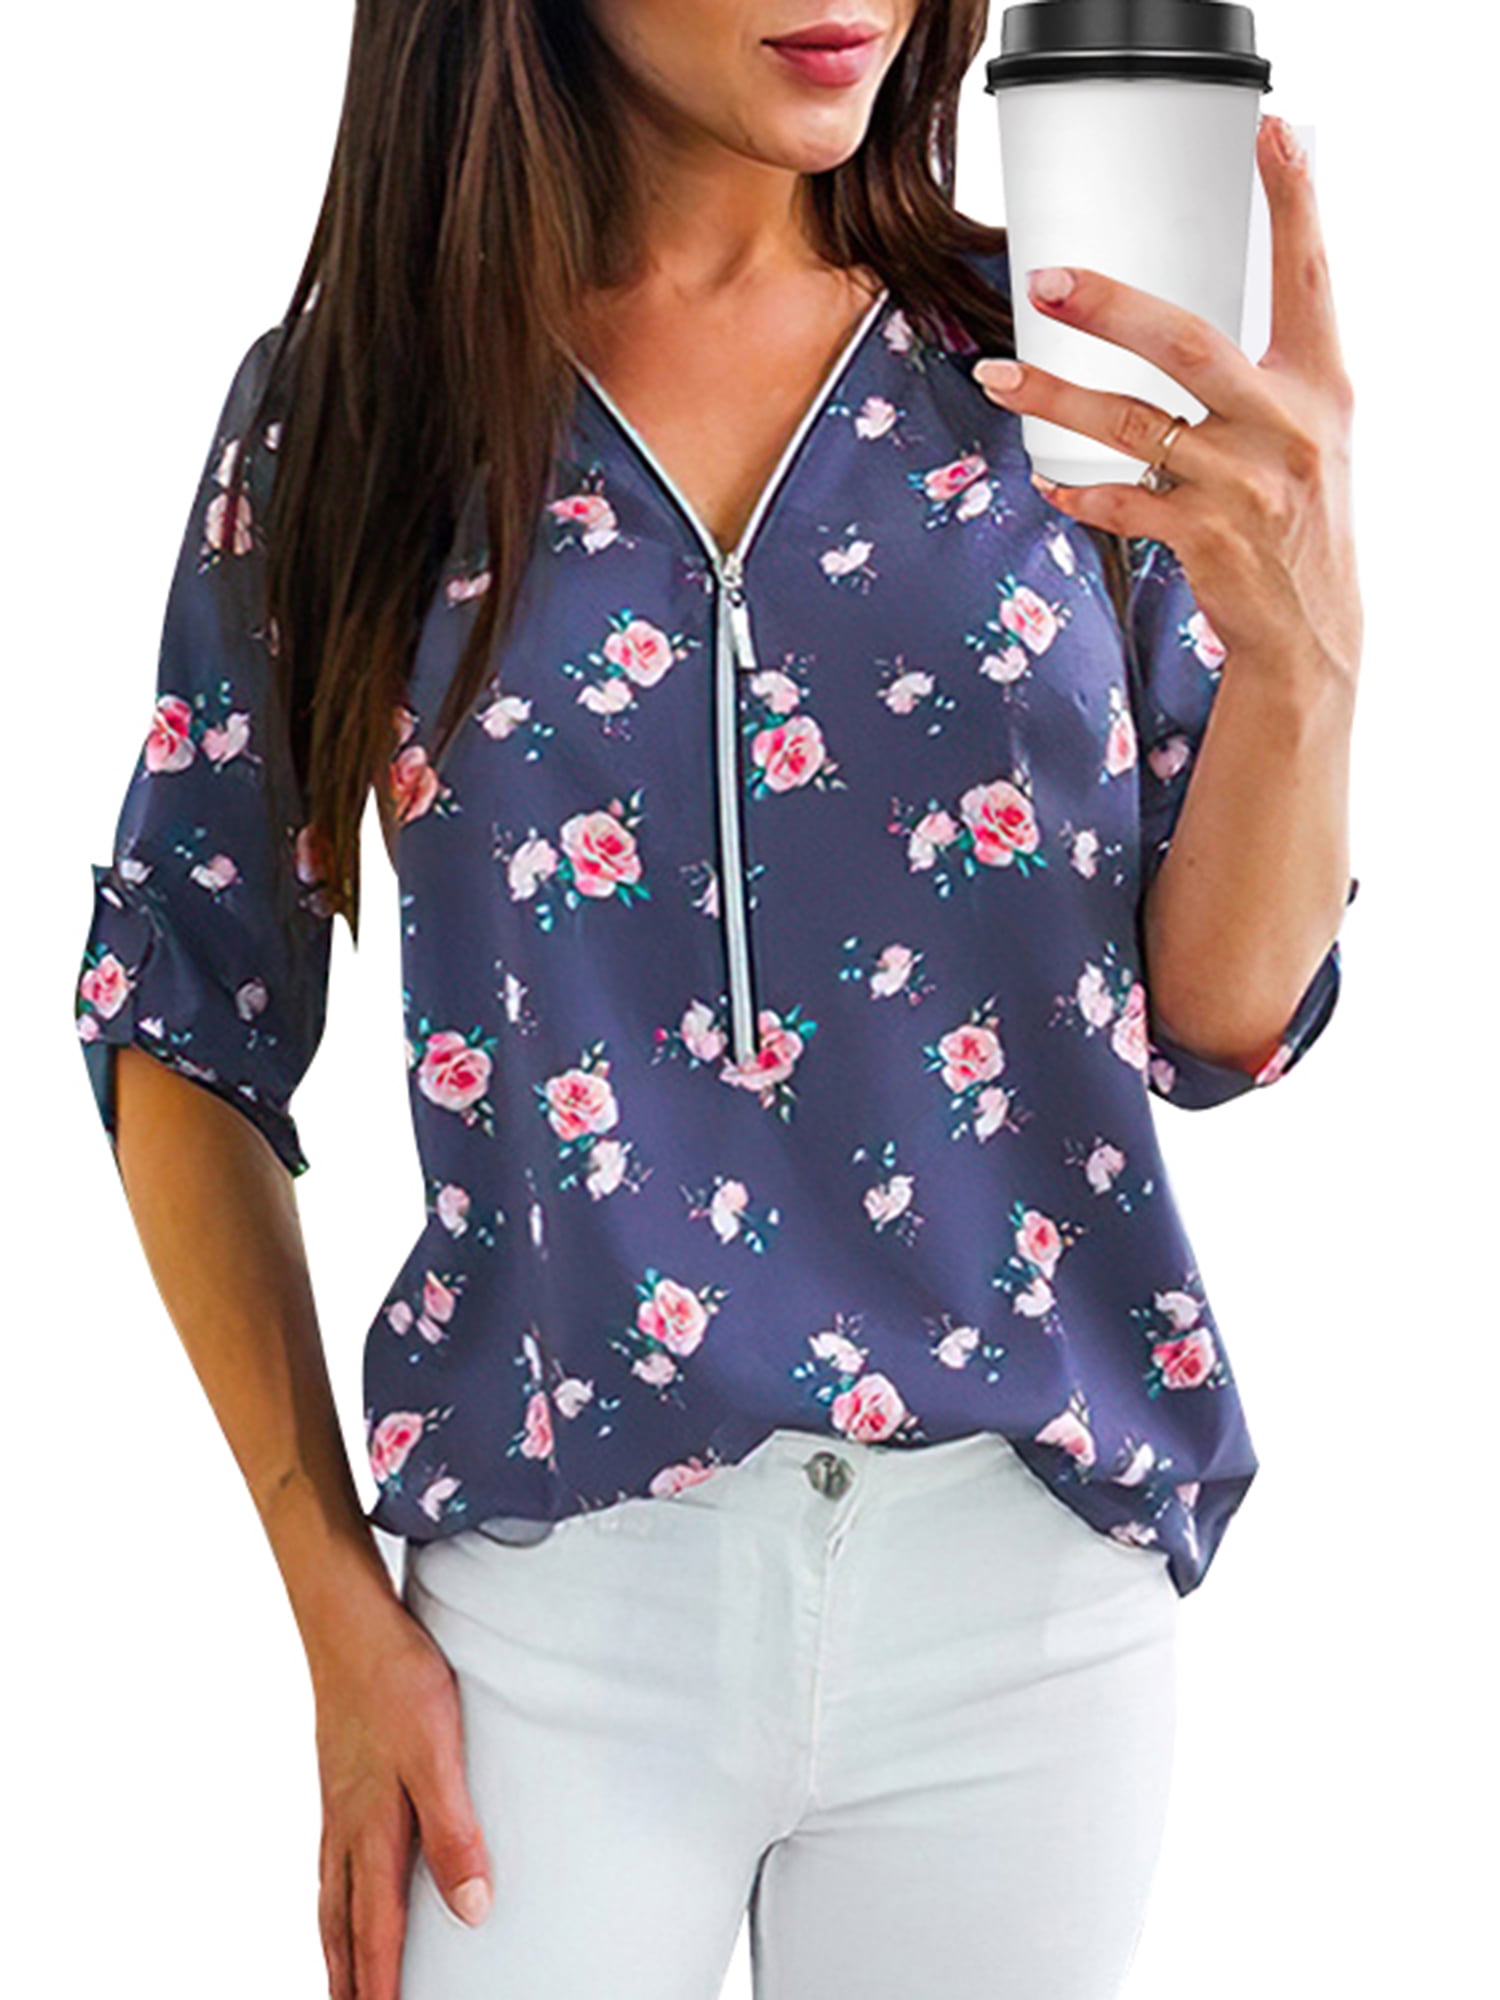 Plus Size Loose V-Neck Shirt Blouse Women Casual Long Sleeve Floral Print Tops